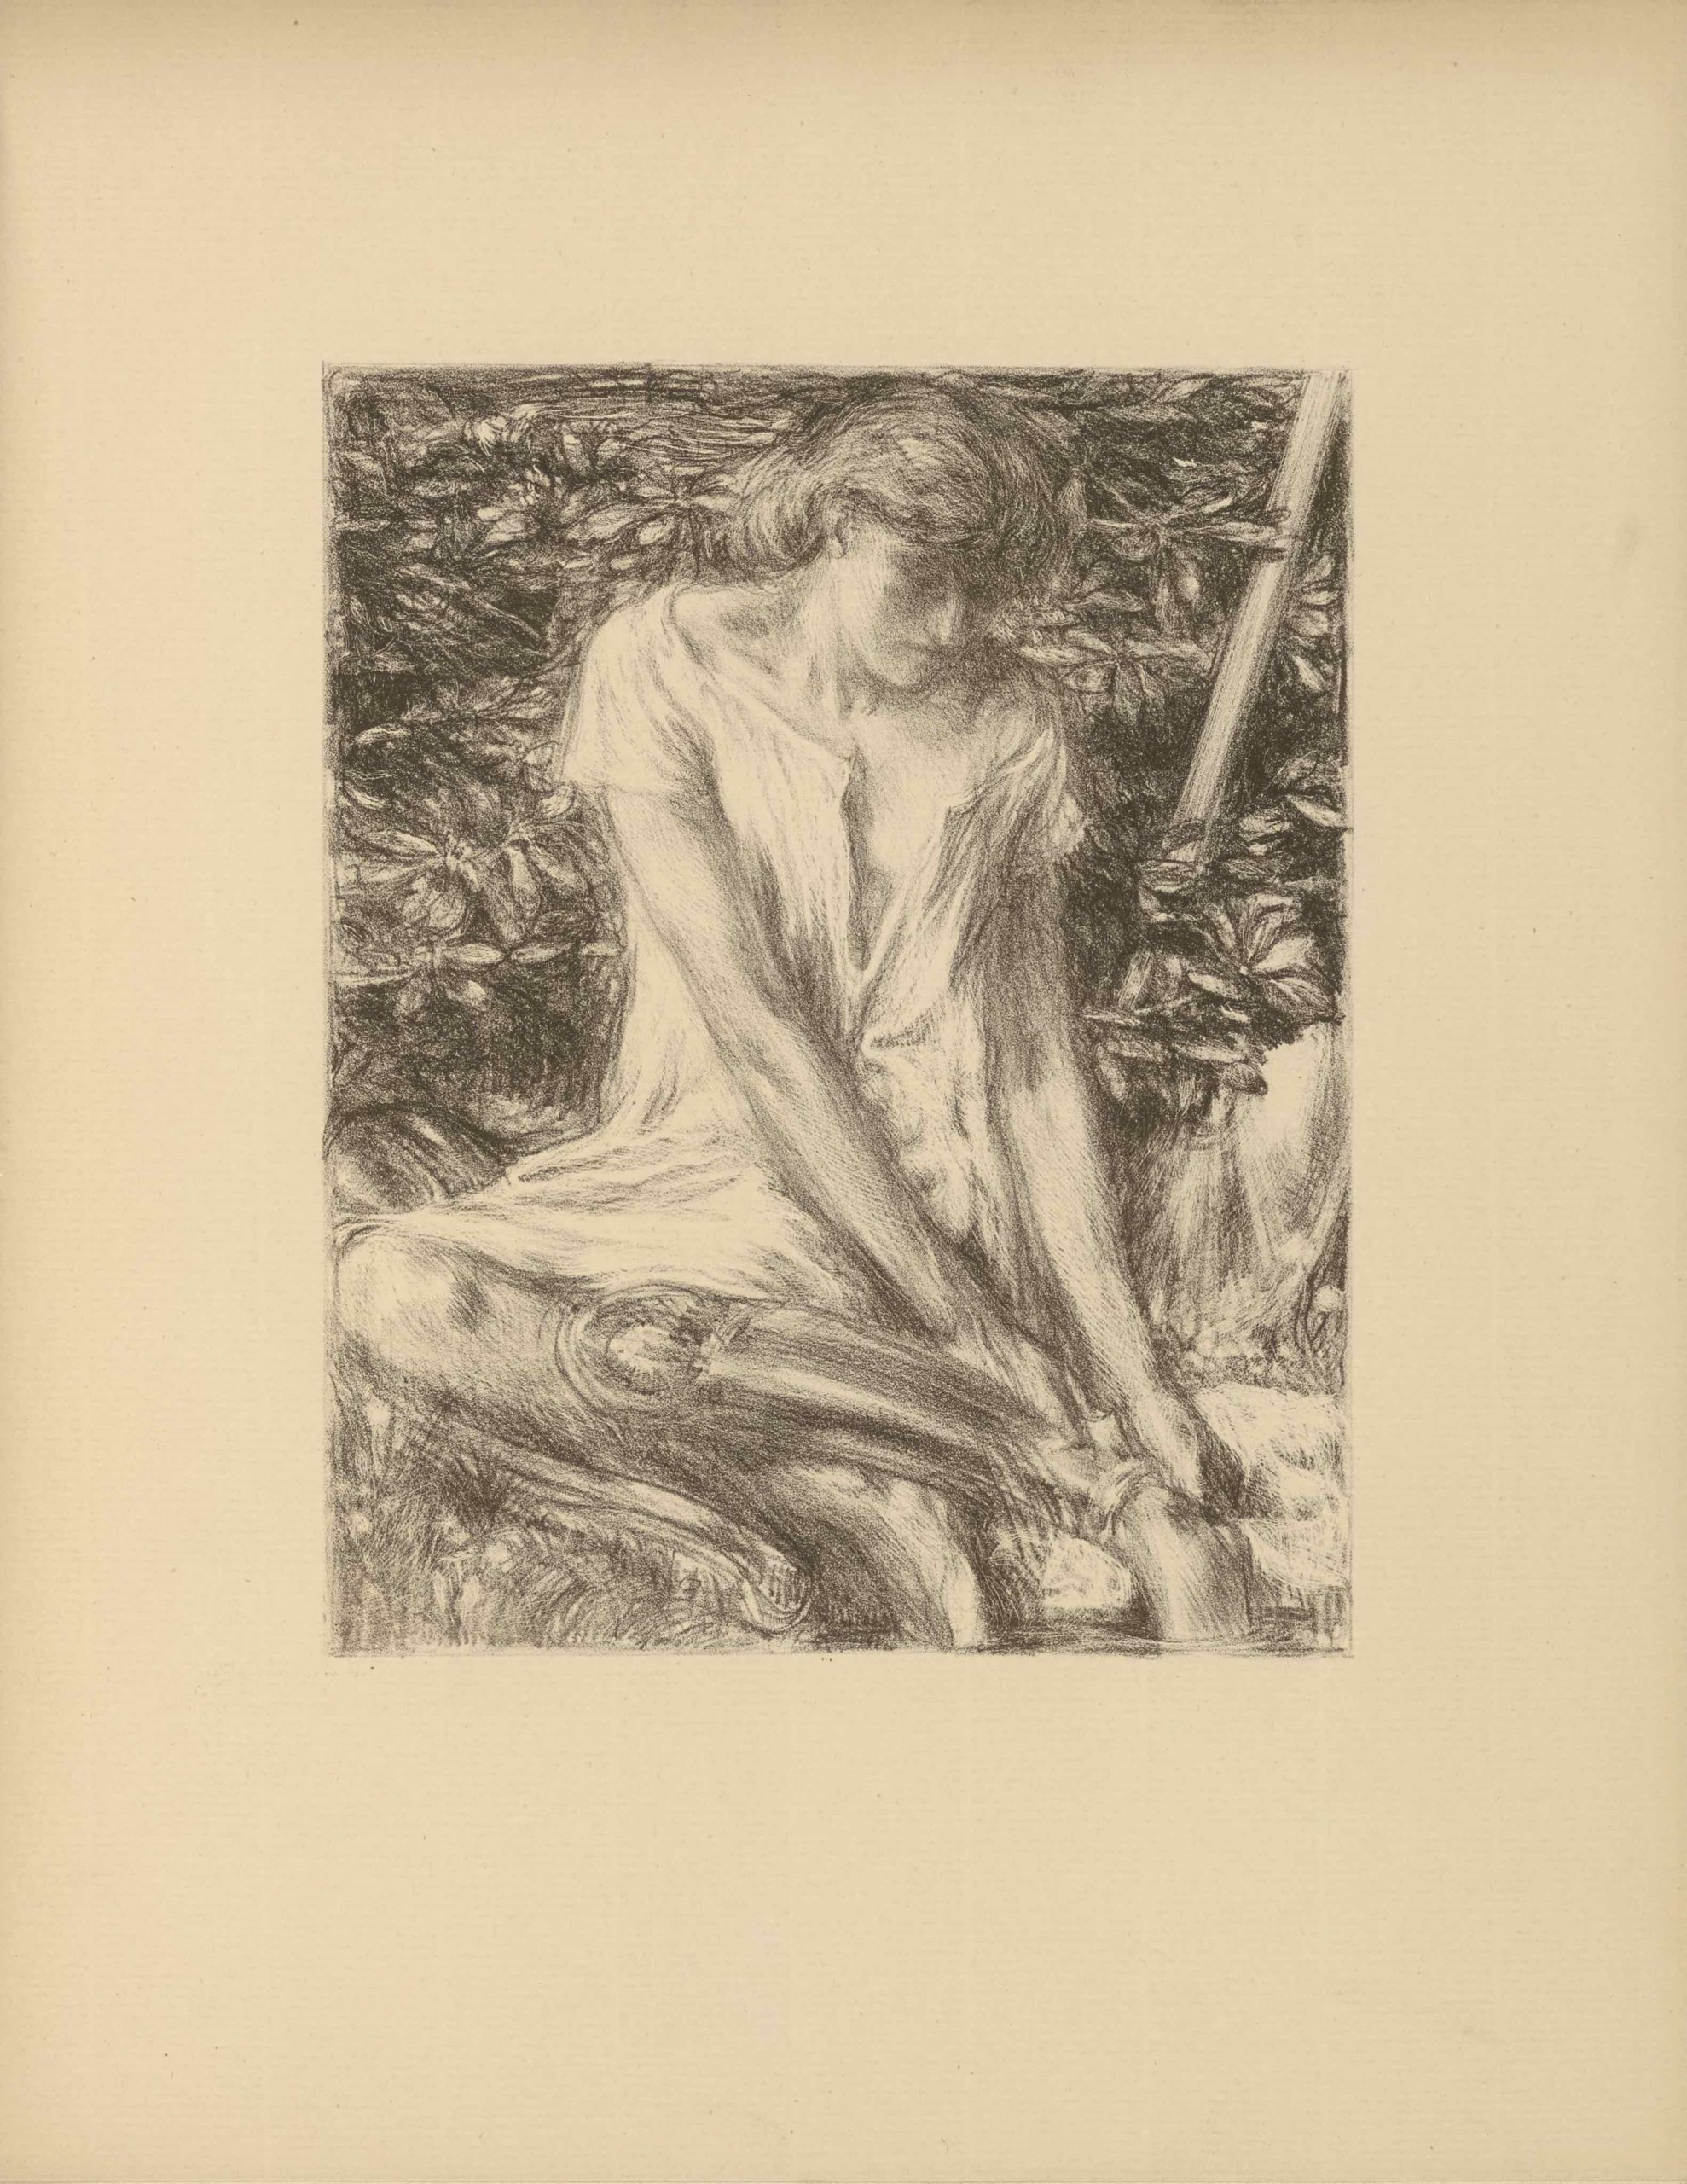 The rectangular lithographic image depicts the huntress Atalanta. It is rendered in soft grey tones and is unbordered, in portrait orientation. The image is a close-up of a woman, depicted frontally, in a seated position with her legs bent toward the right. Her left foot is dipped into a pool. She leans down to adjust armour on her left calf. Her loose-fitting gown is cut in a deep “v” at the front, and her hair is tucked up behind her neck. To her right is a pole which rests diagonally and a burnished shield. In the background behind her is a grove of flowers.